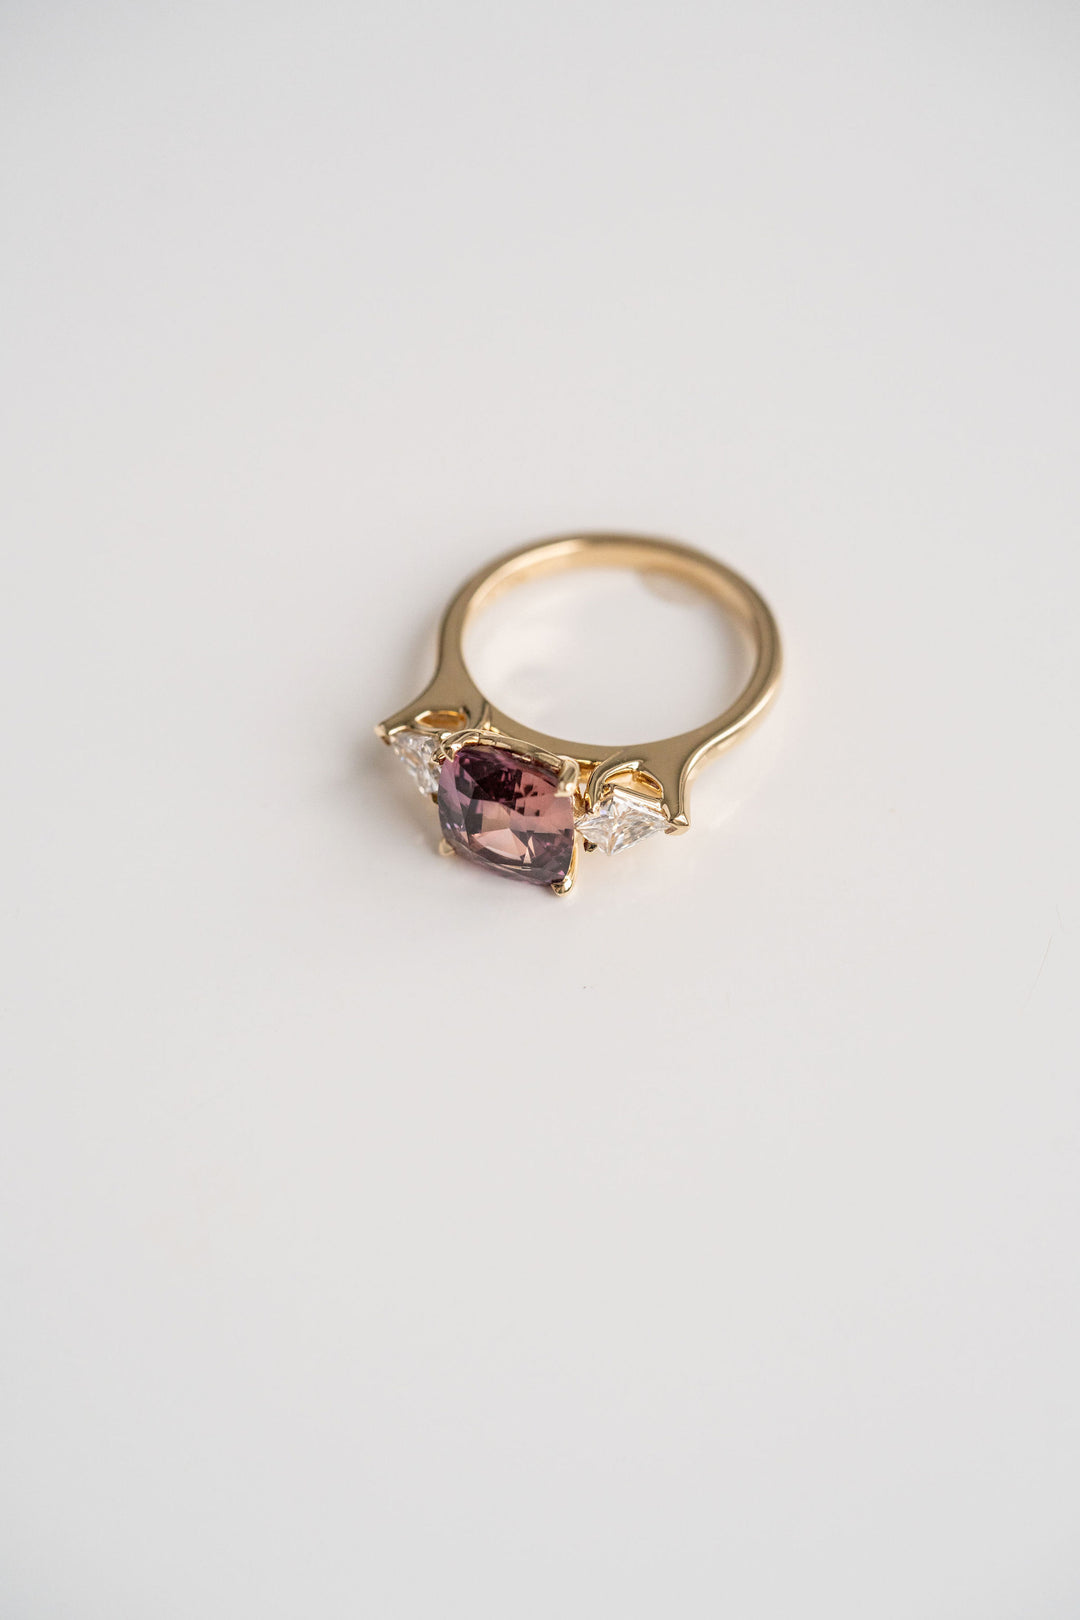 3.55ct. Cushion Cut Padparadscha Sapphire With Kite Shape Accents, 14k Yellow Gold